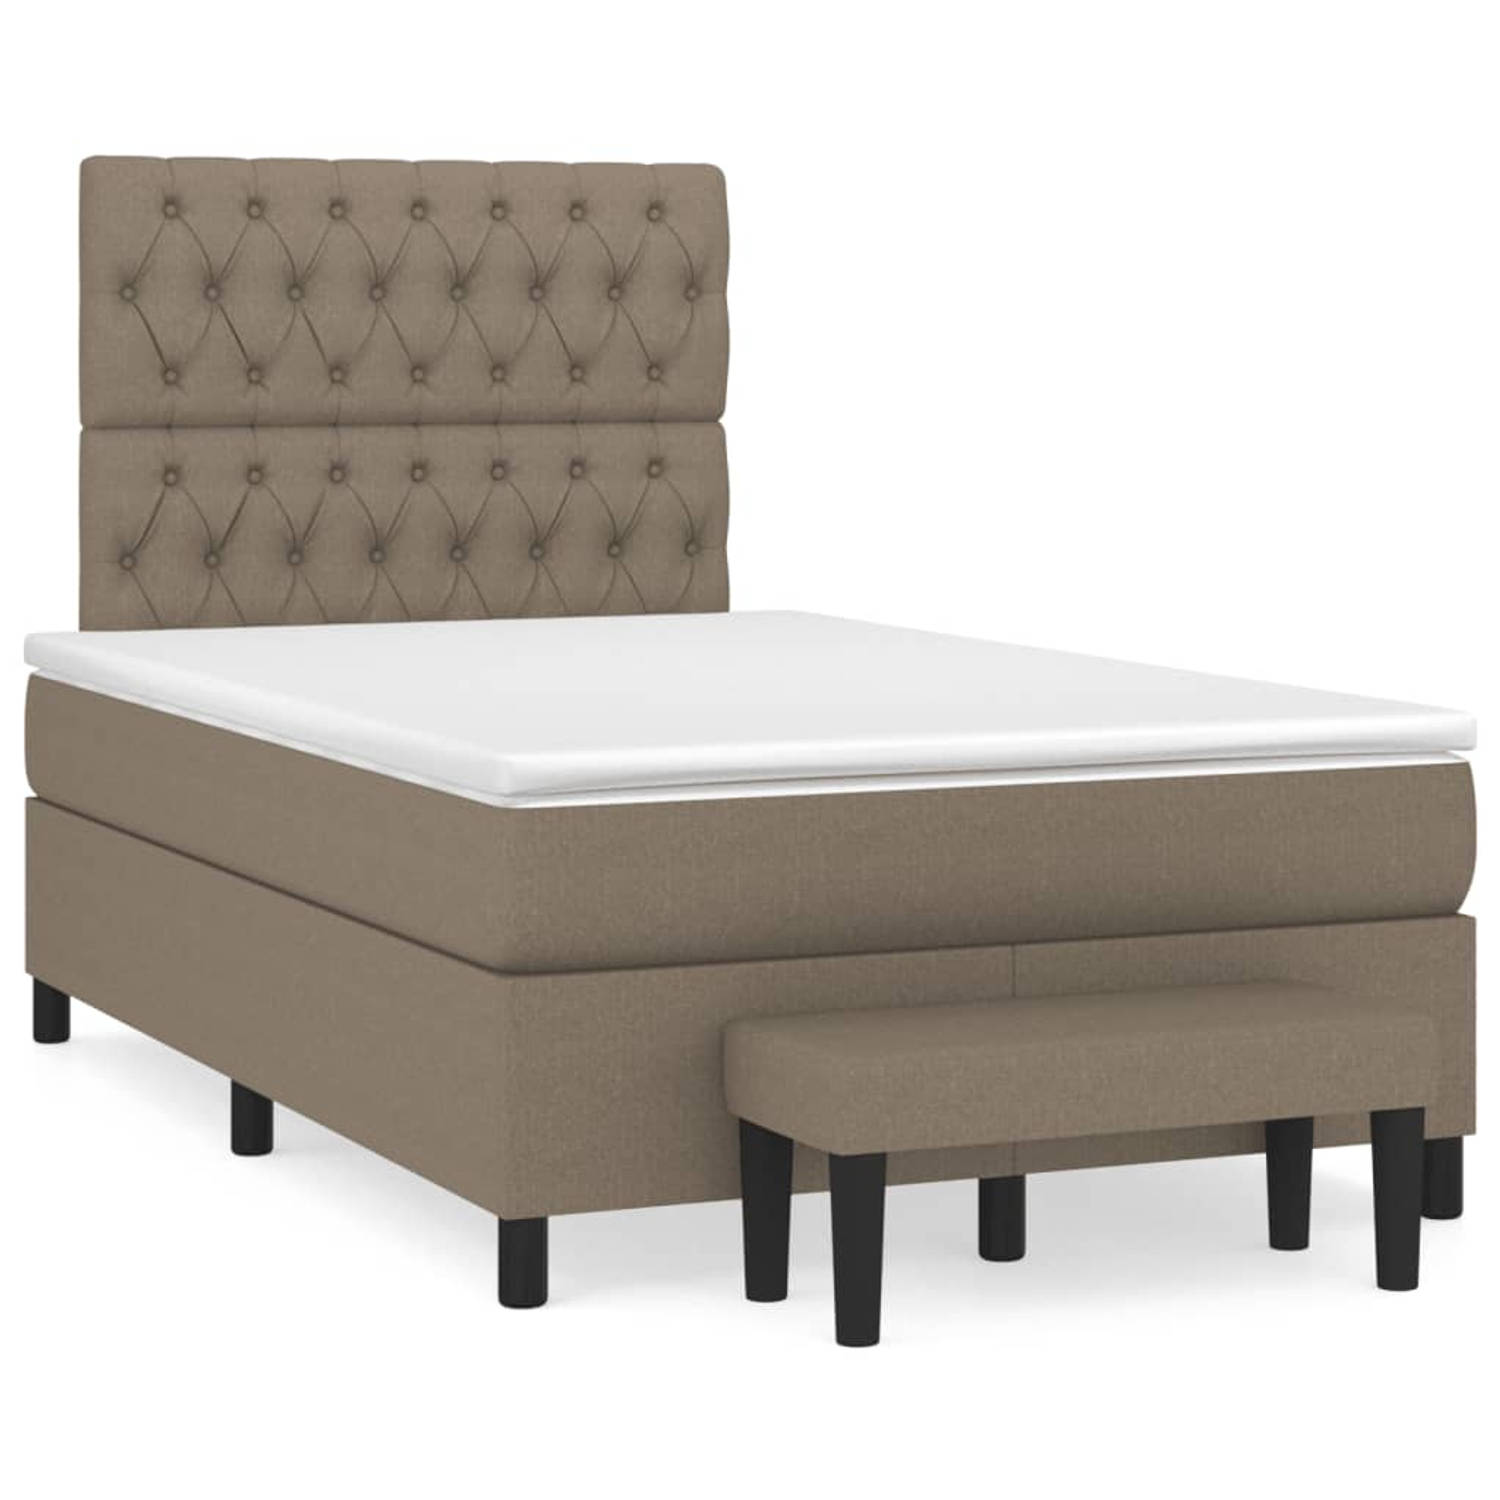 The Living Store Boxspring met matras stof taupe 120x200 cm - Boxspring - Boxsprings - Pocketveringbed - Bed - Slaapmeubel - Boxspringbed - Boxspring Bed - Eenpersoonsbed - Bed Met